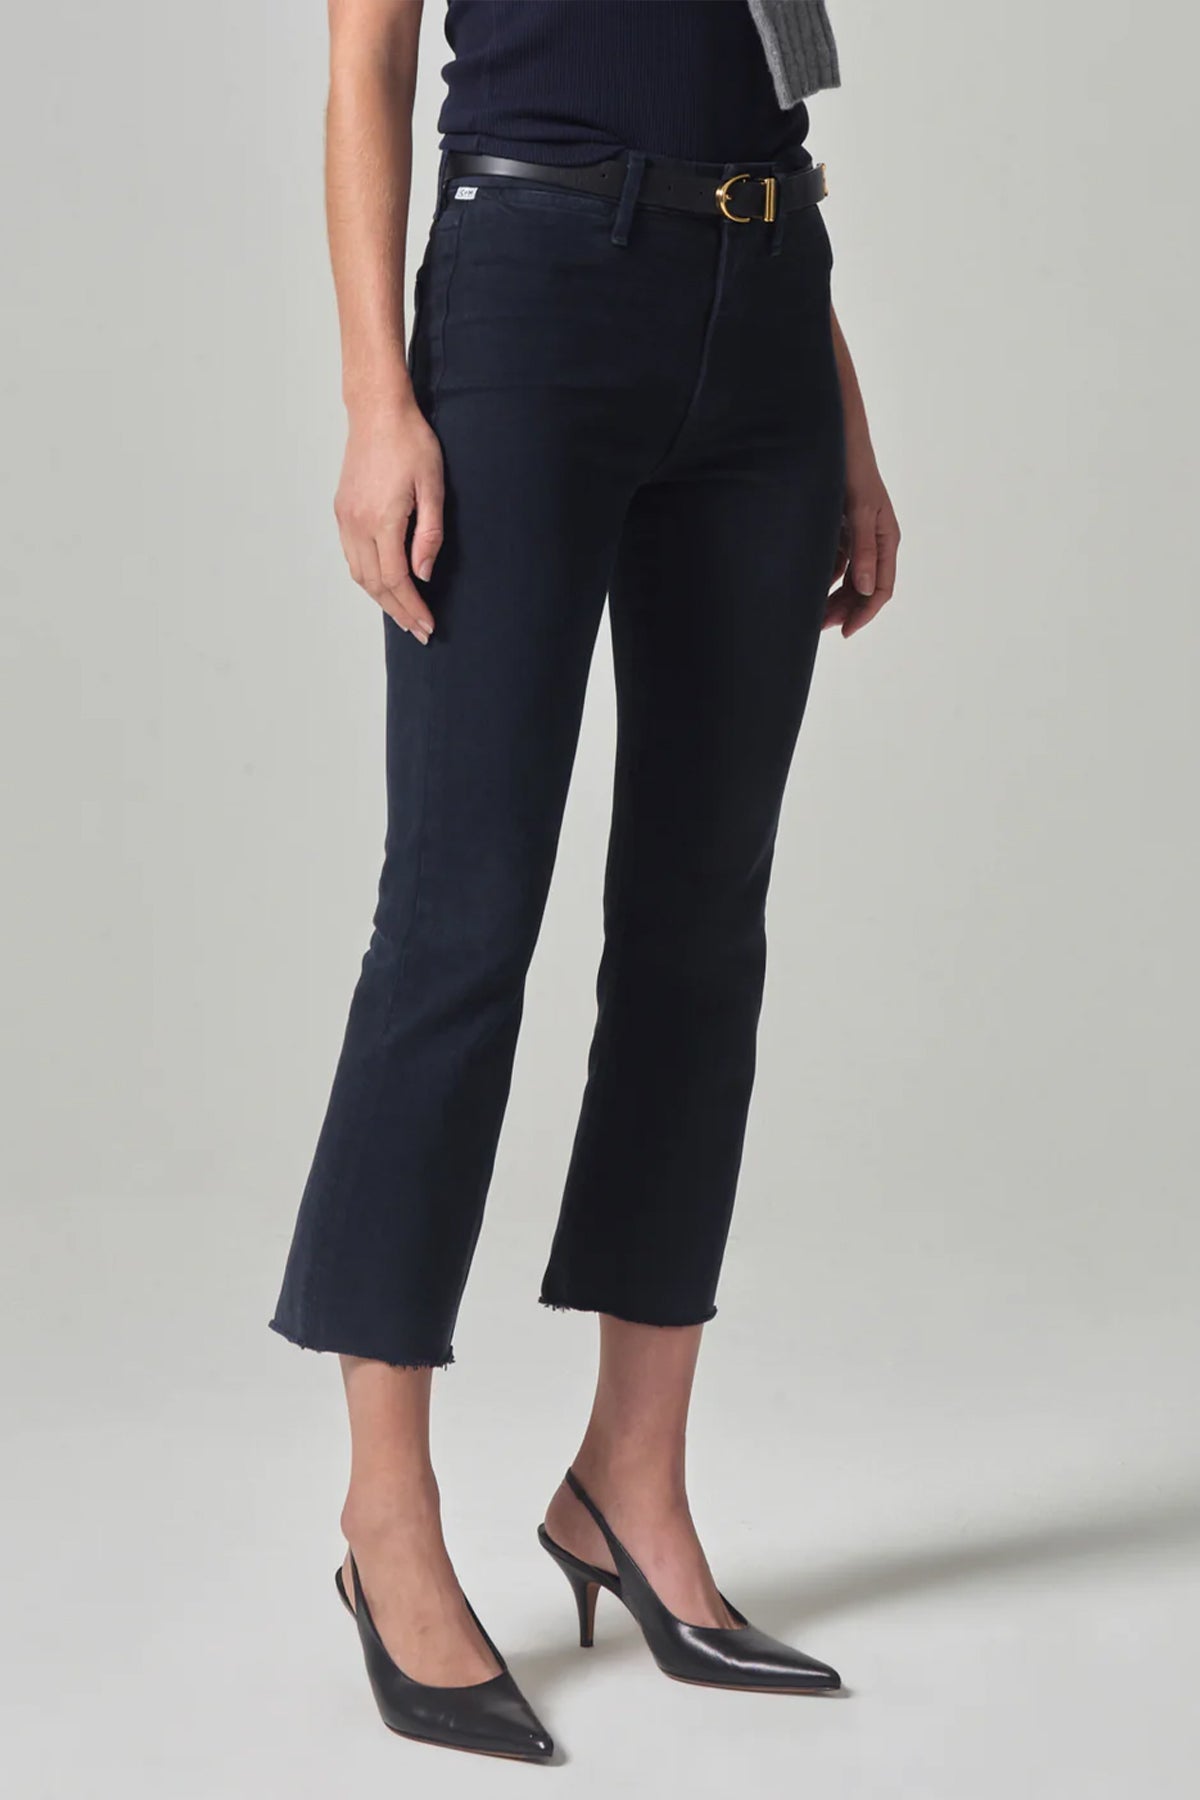 Isola Cropped Trouser in Navy - shop-olivia.com